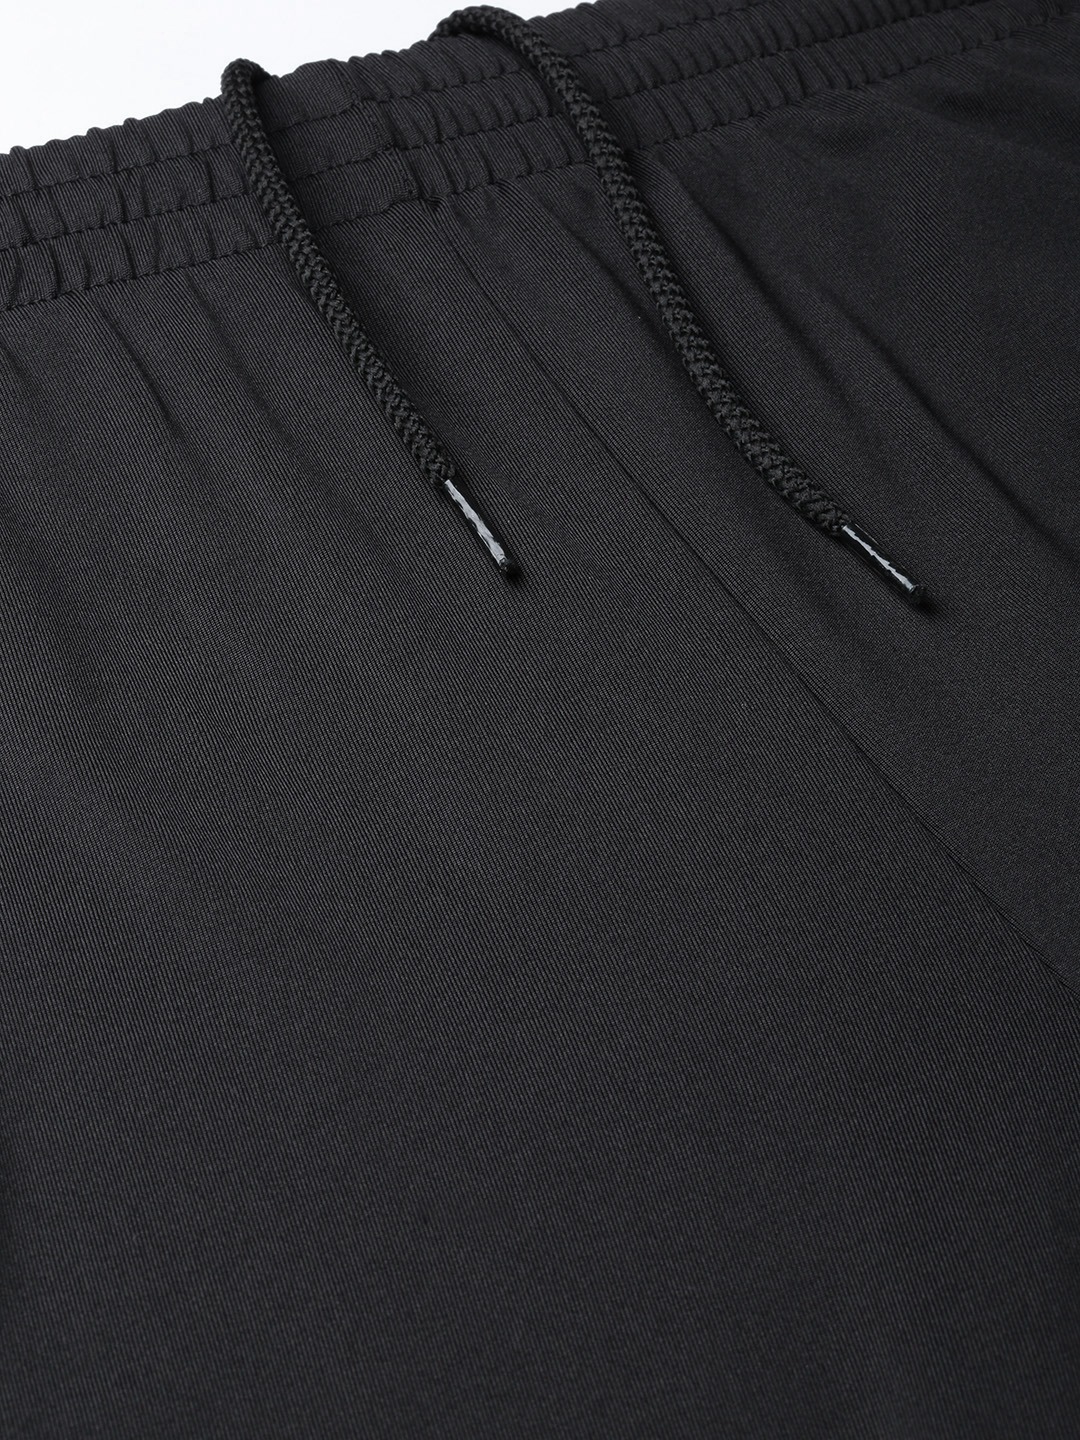 Clothing Tracksuits | OFF LIMITS Men Black Solid Tracksuit - PY99324